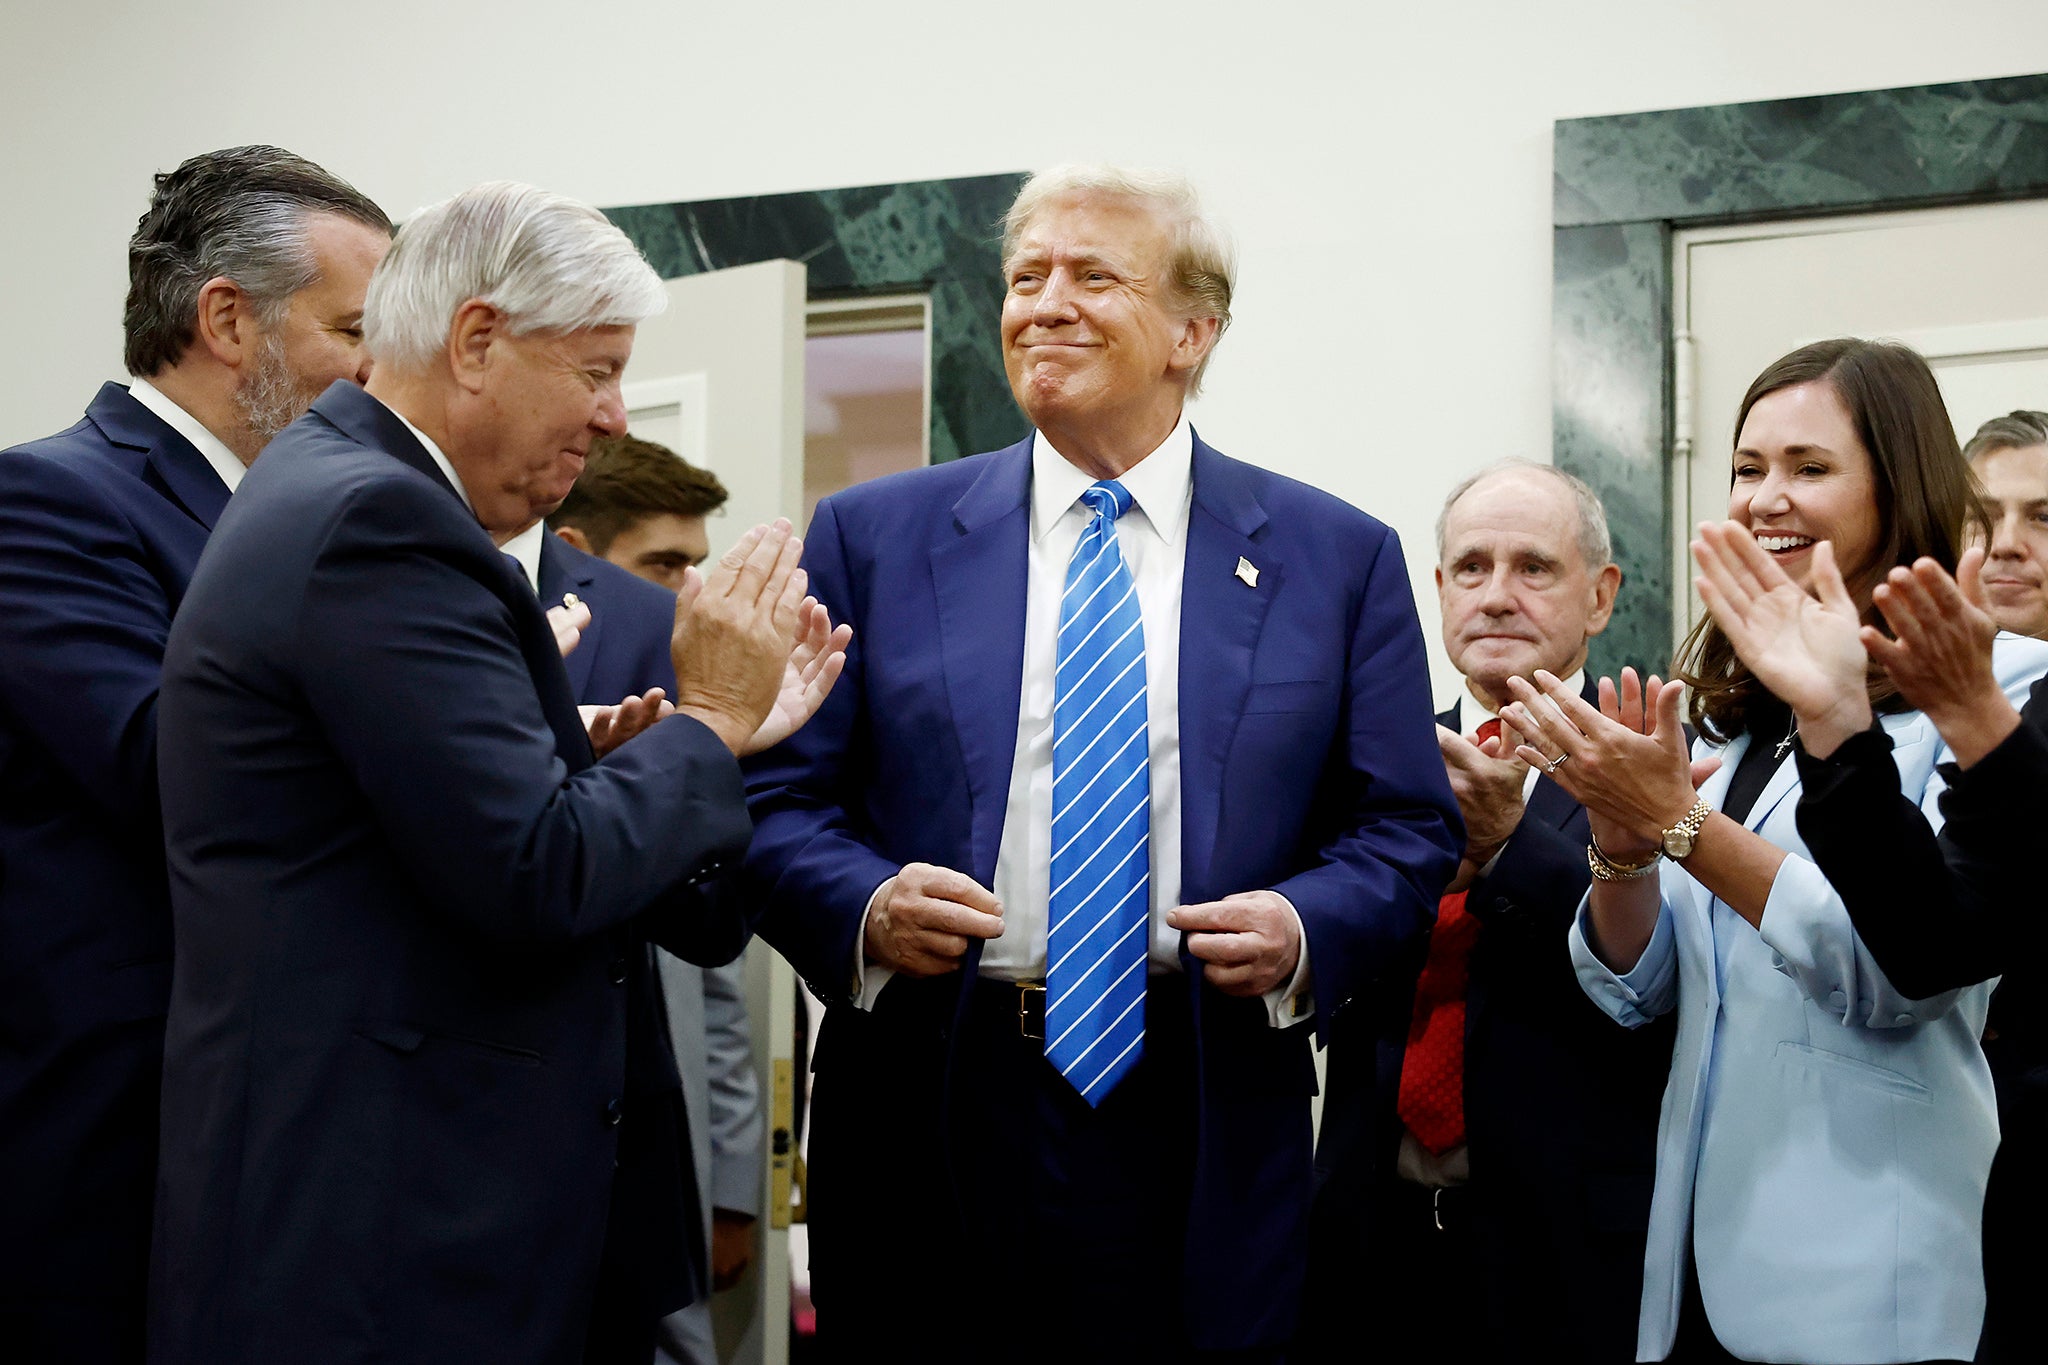 Trump is applauded by Senate Republicans in Washington DC on Thursday